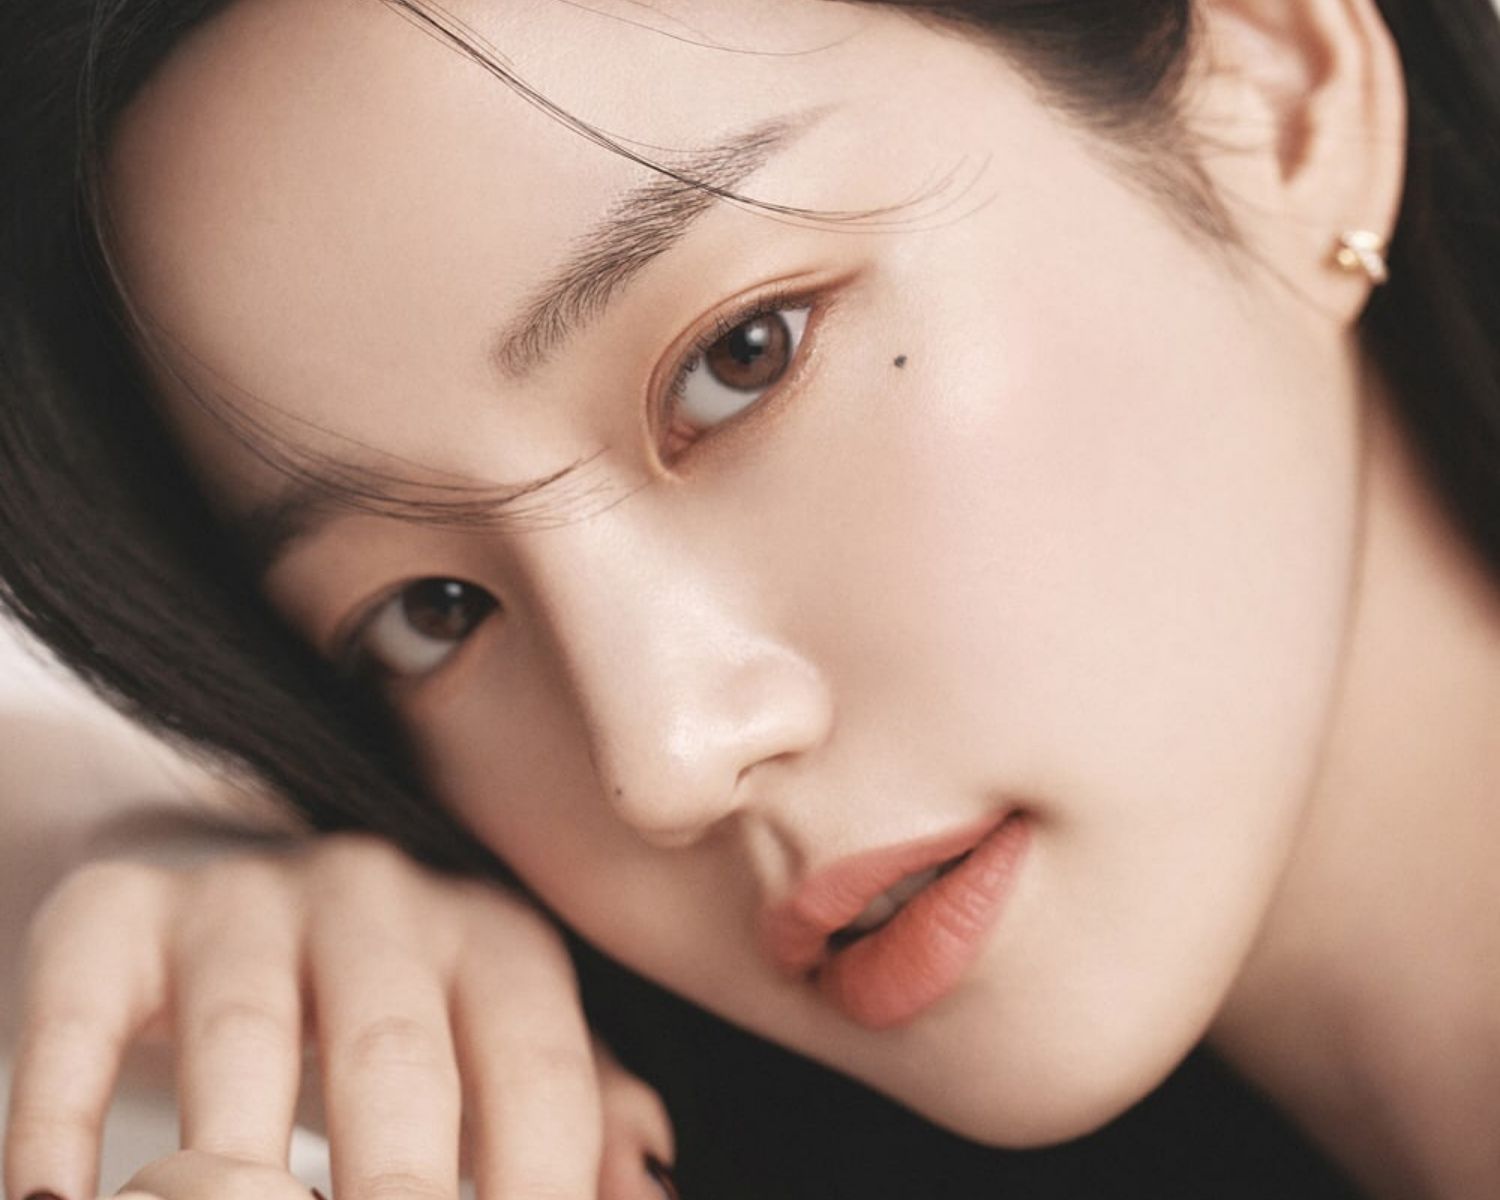 Lee Yoo Bi for Marie Claire before getting offered the role for "The Girl Downstairs"